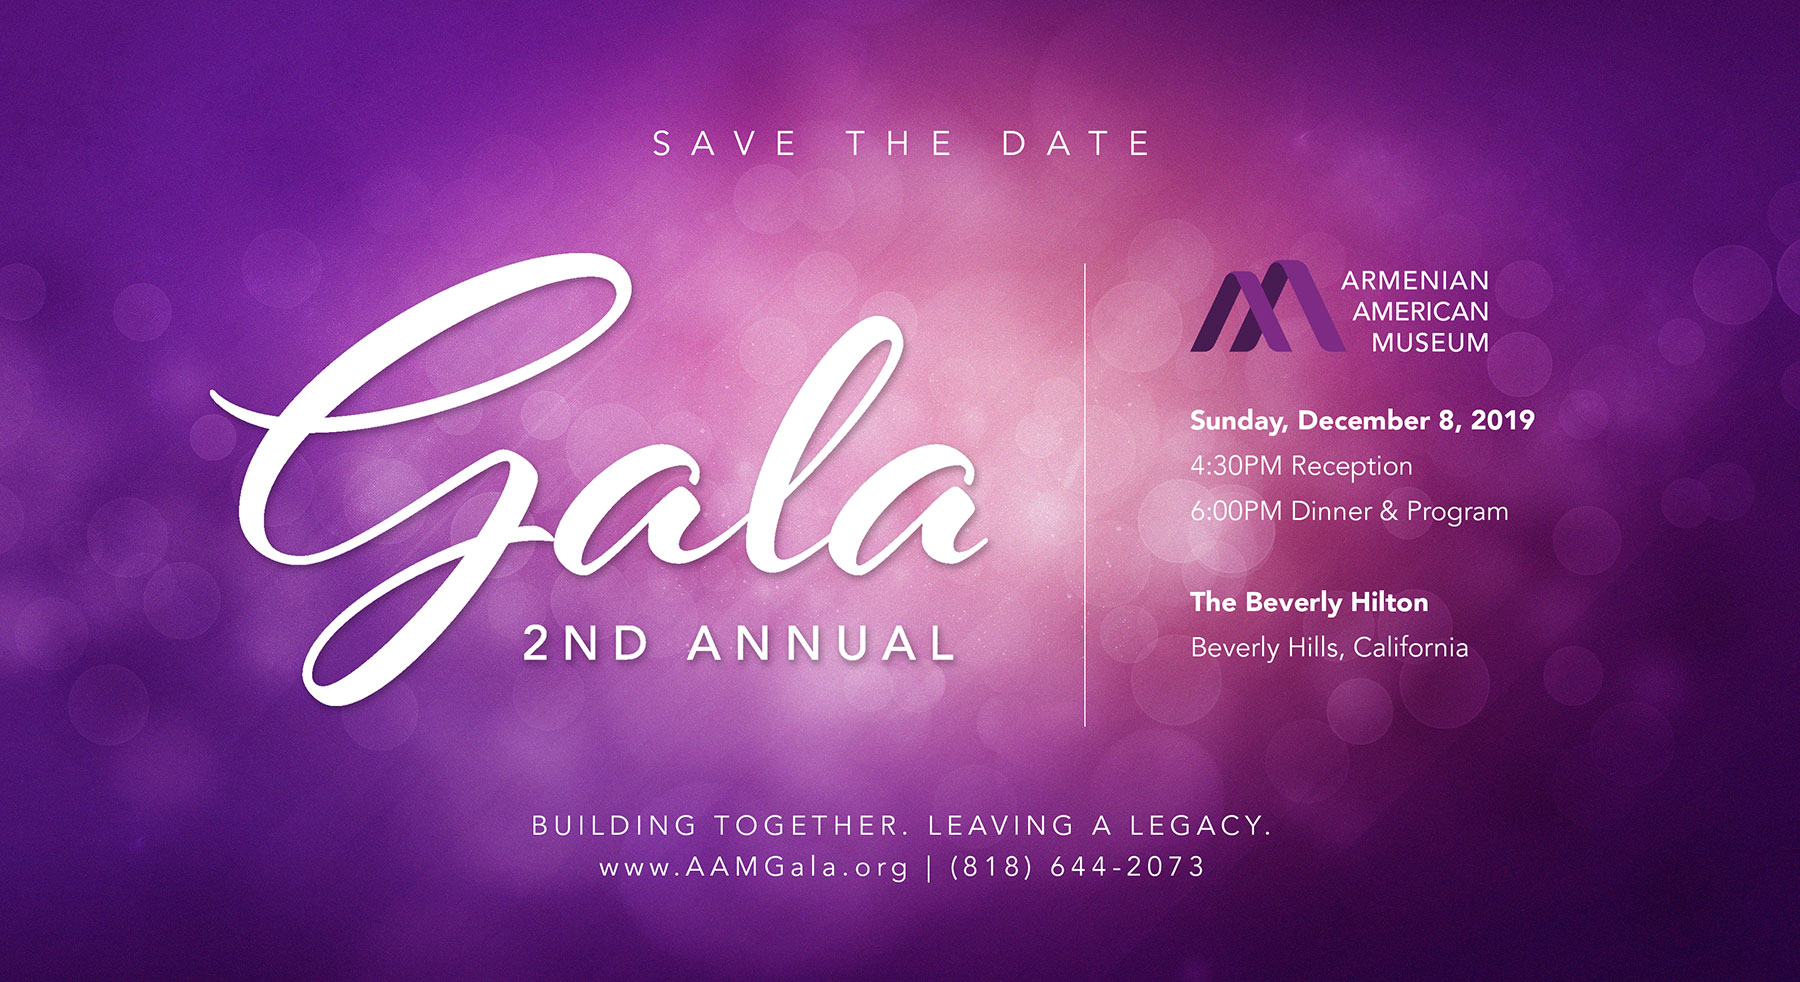 2nd Annual Armenian American Museum Gala Save the Date